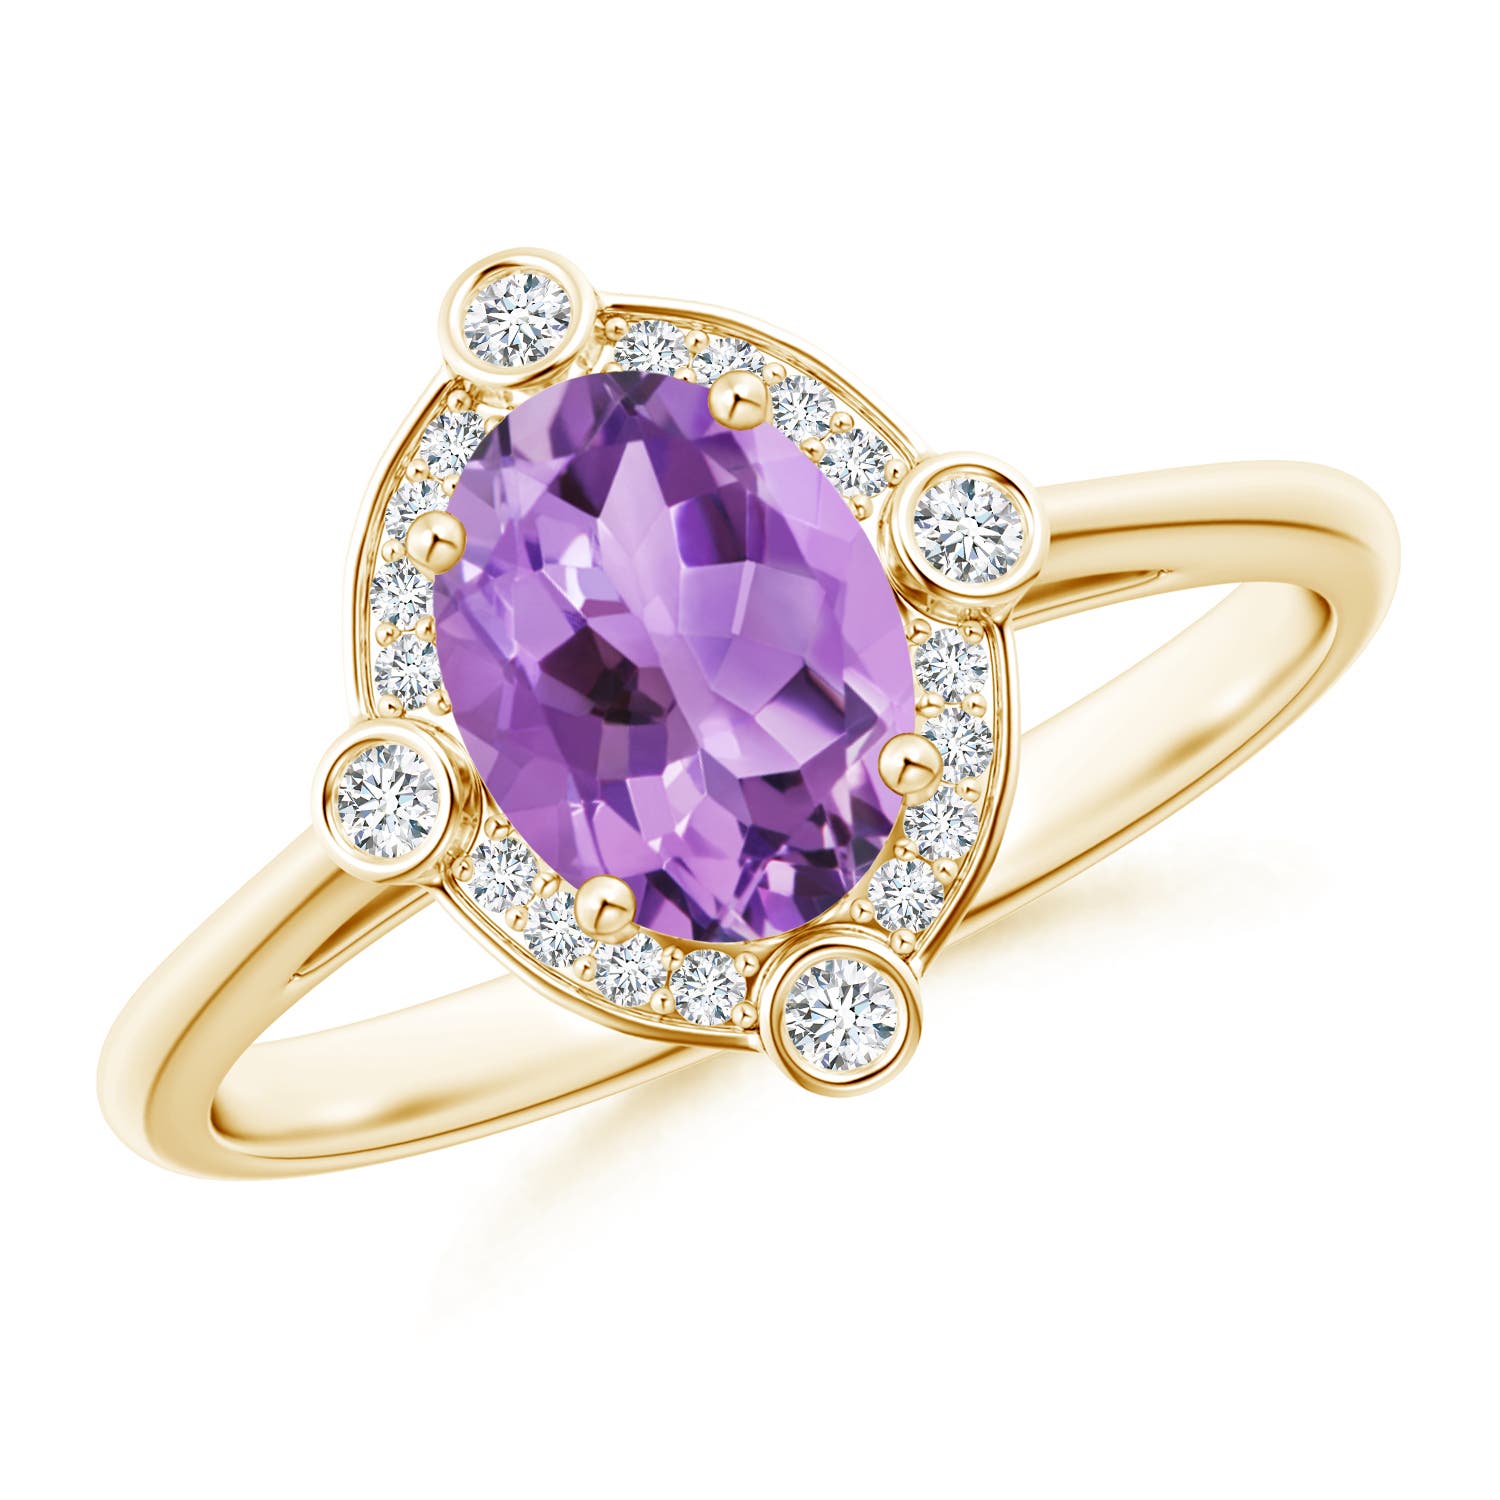 A - Amethyst / 1.29 CT / 14 KT Yellow Gold